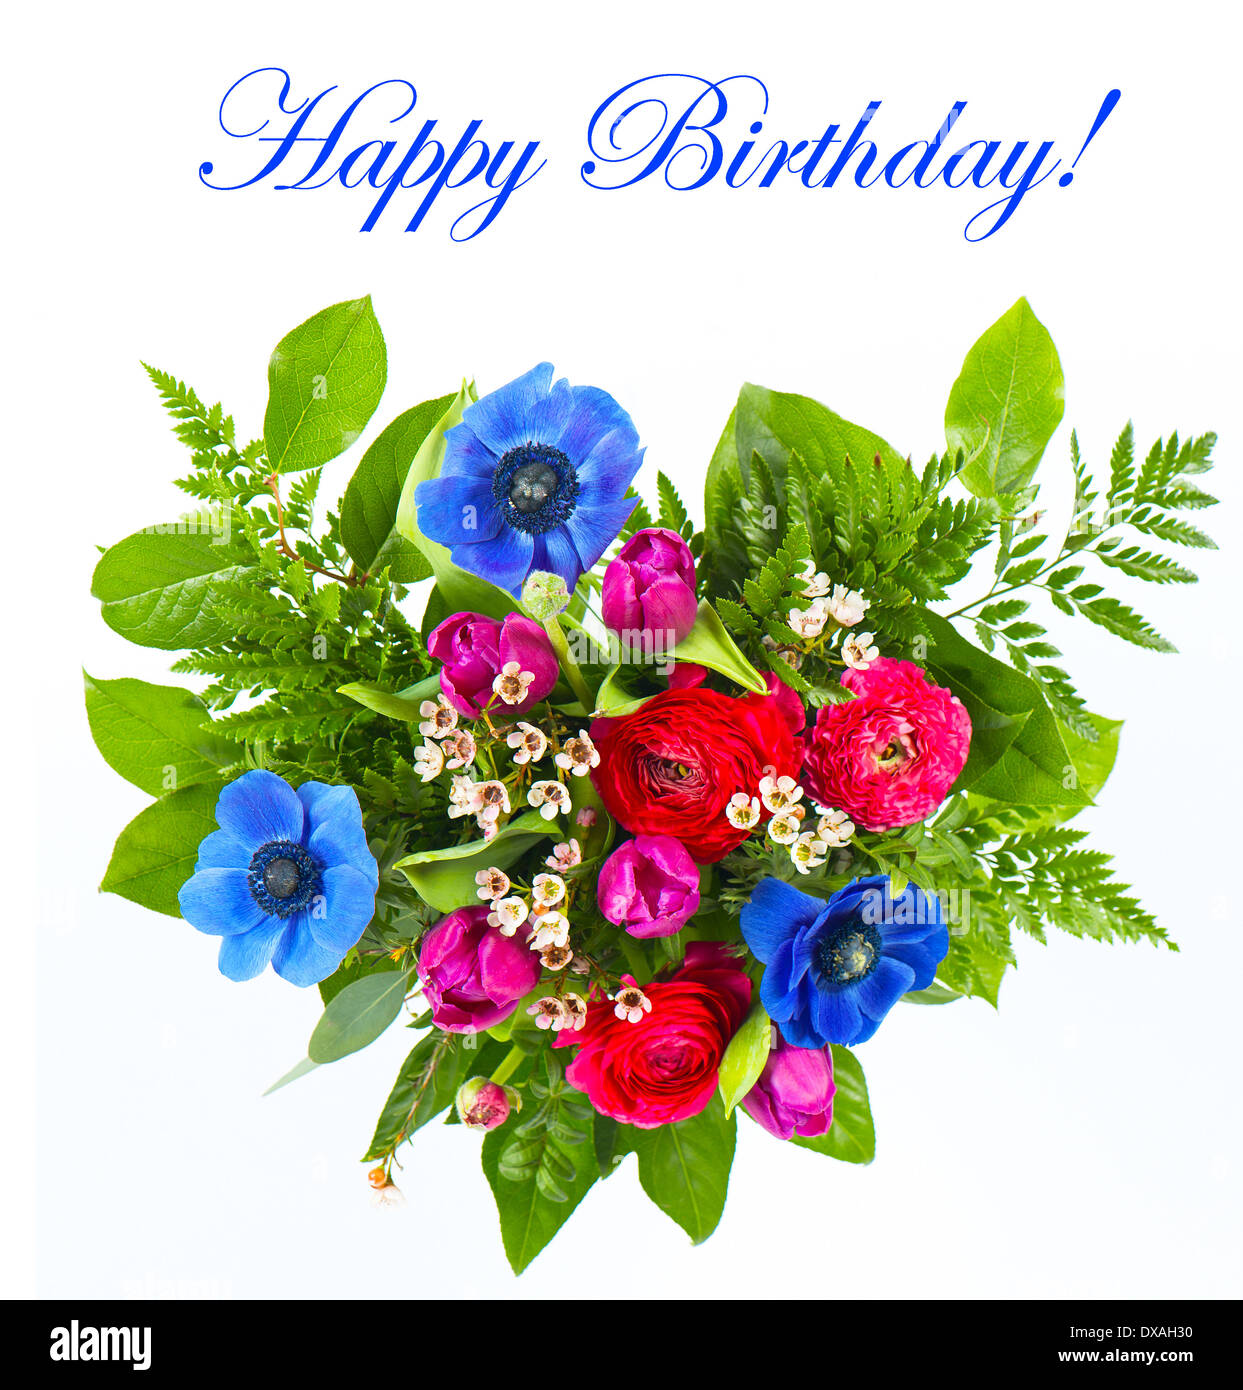 Happy Birthday! colorful flowers bouquet on white background Stock ...